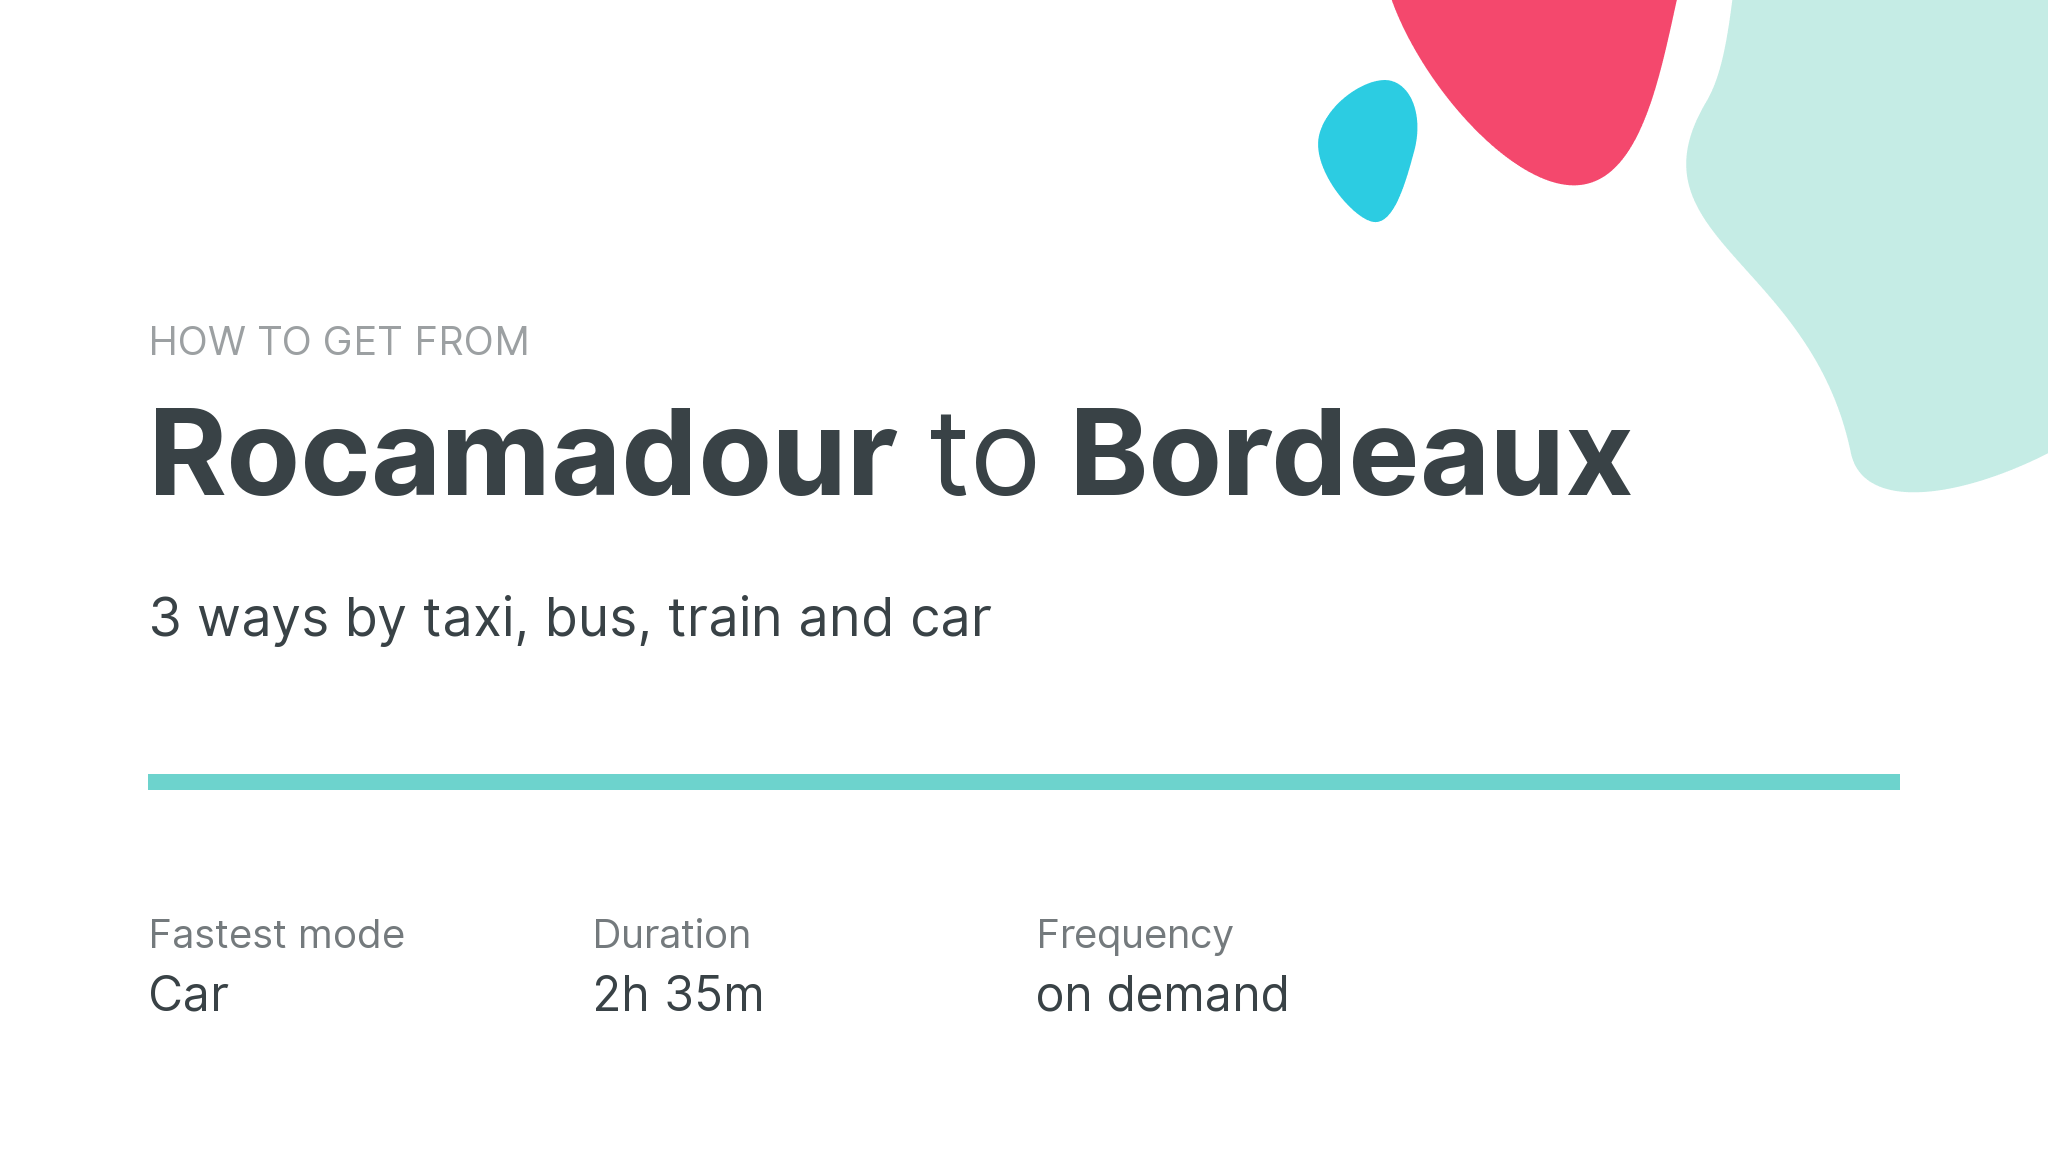 How do I get from Rocamadour to Bordeaux